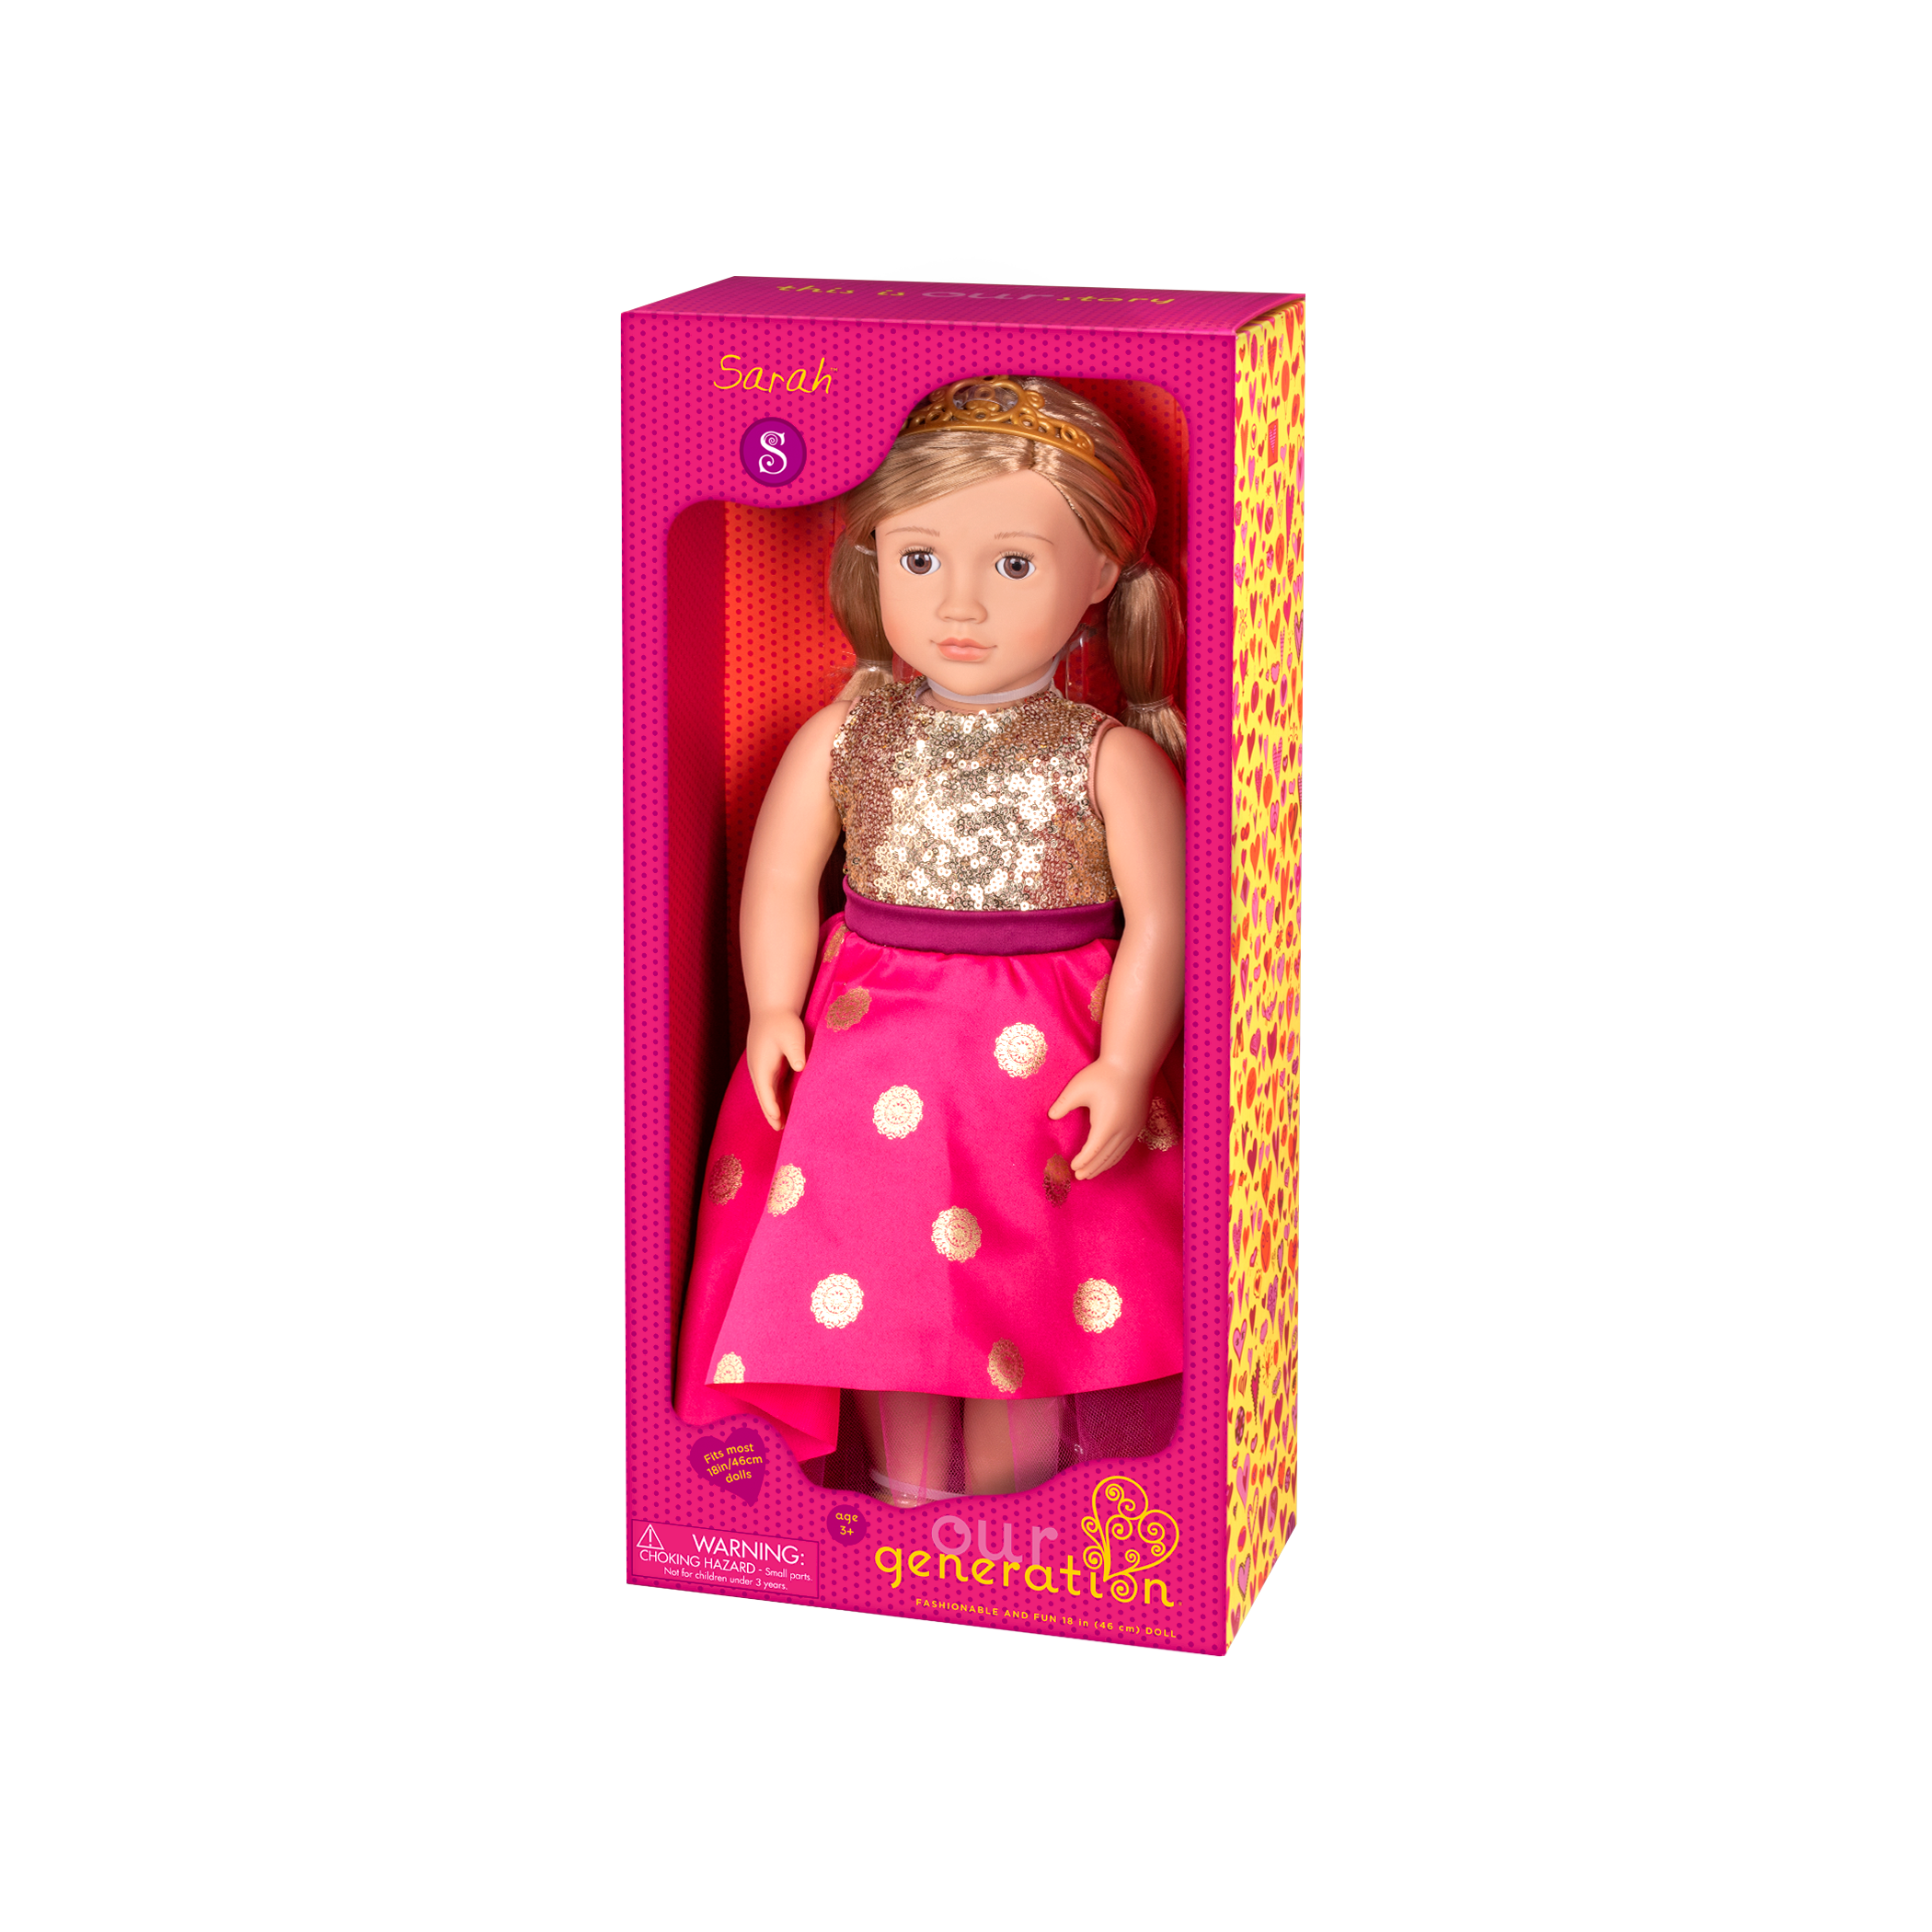 18-inch doll with blonde hair and brown eyes